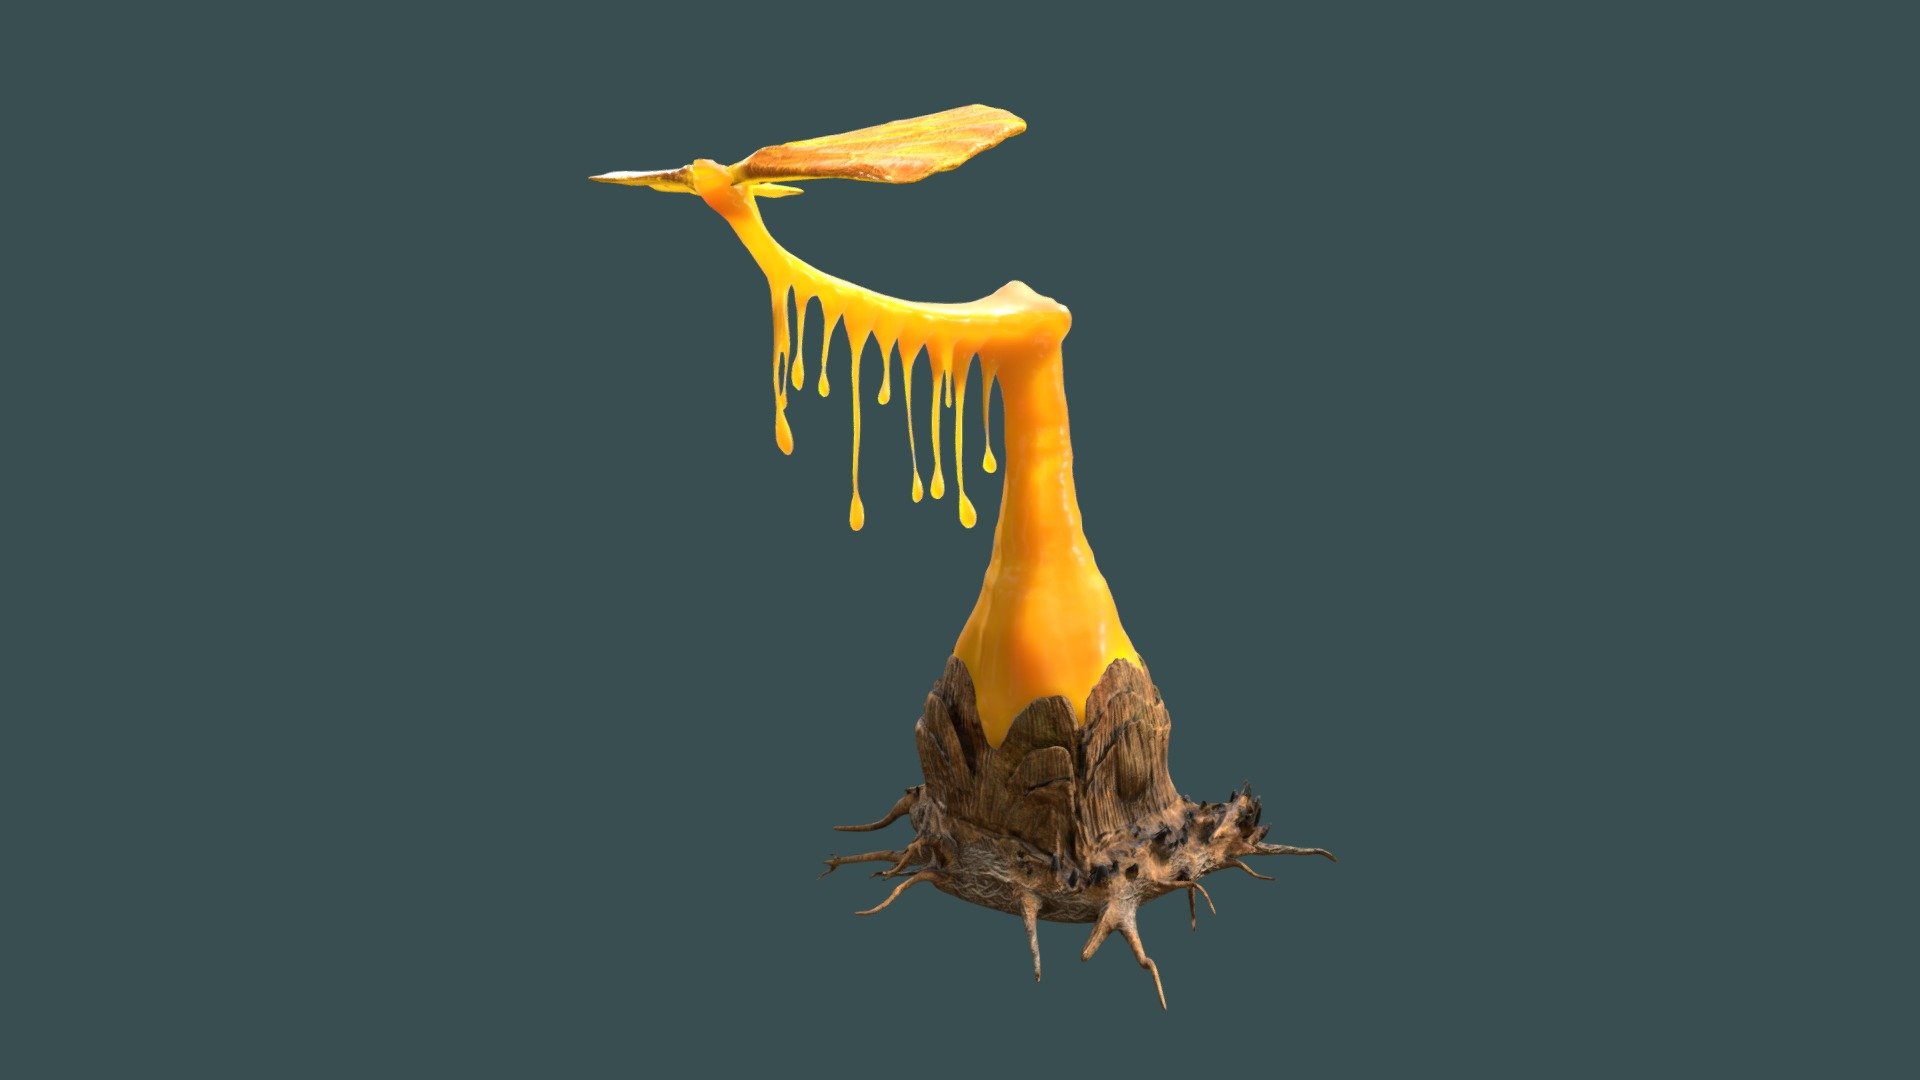 I created this assets for an Felucia environment, I call it Honeyfly, because it looks like a fly out of honey :D
Asset was created using Blender and Substance Painter.

If you are interested in more I do, you can check out my post on Artstation: https://www.artstation.com/artwork/xYEBYW - Honeyfly - Felucia plant - 3D model by phil_creations 3d model